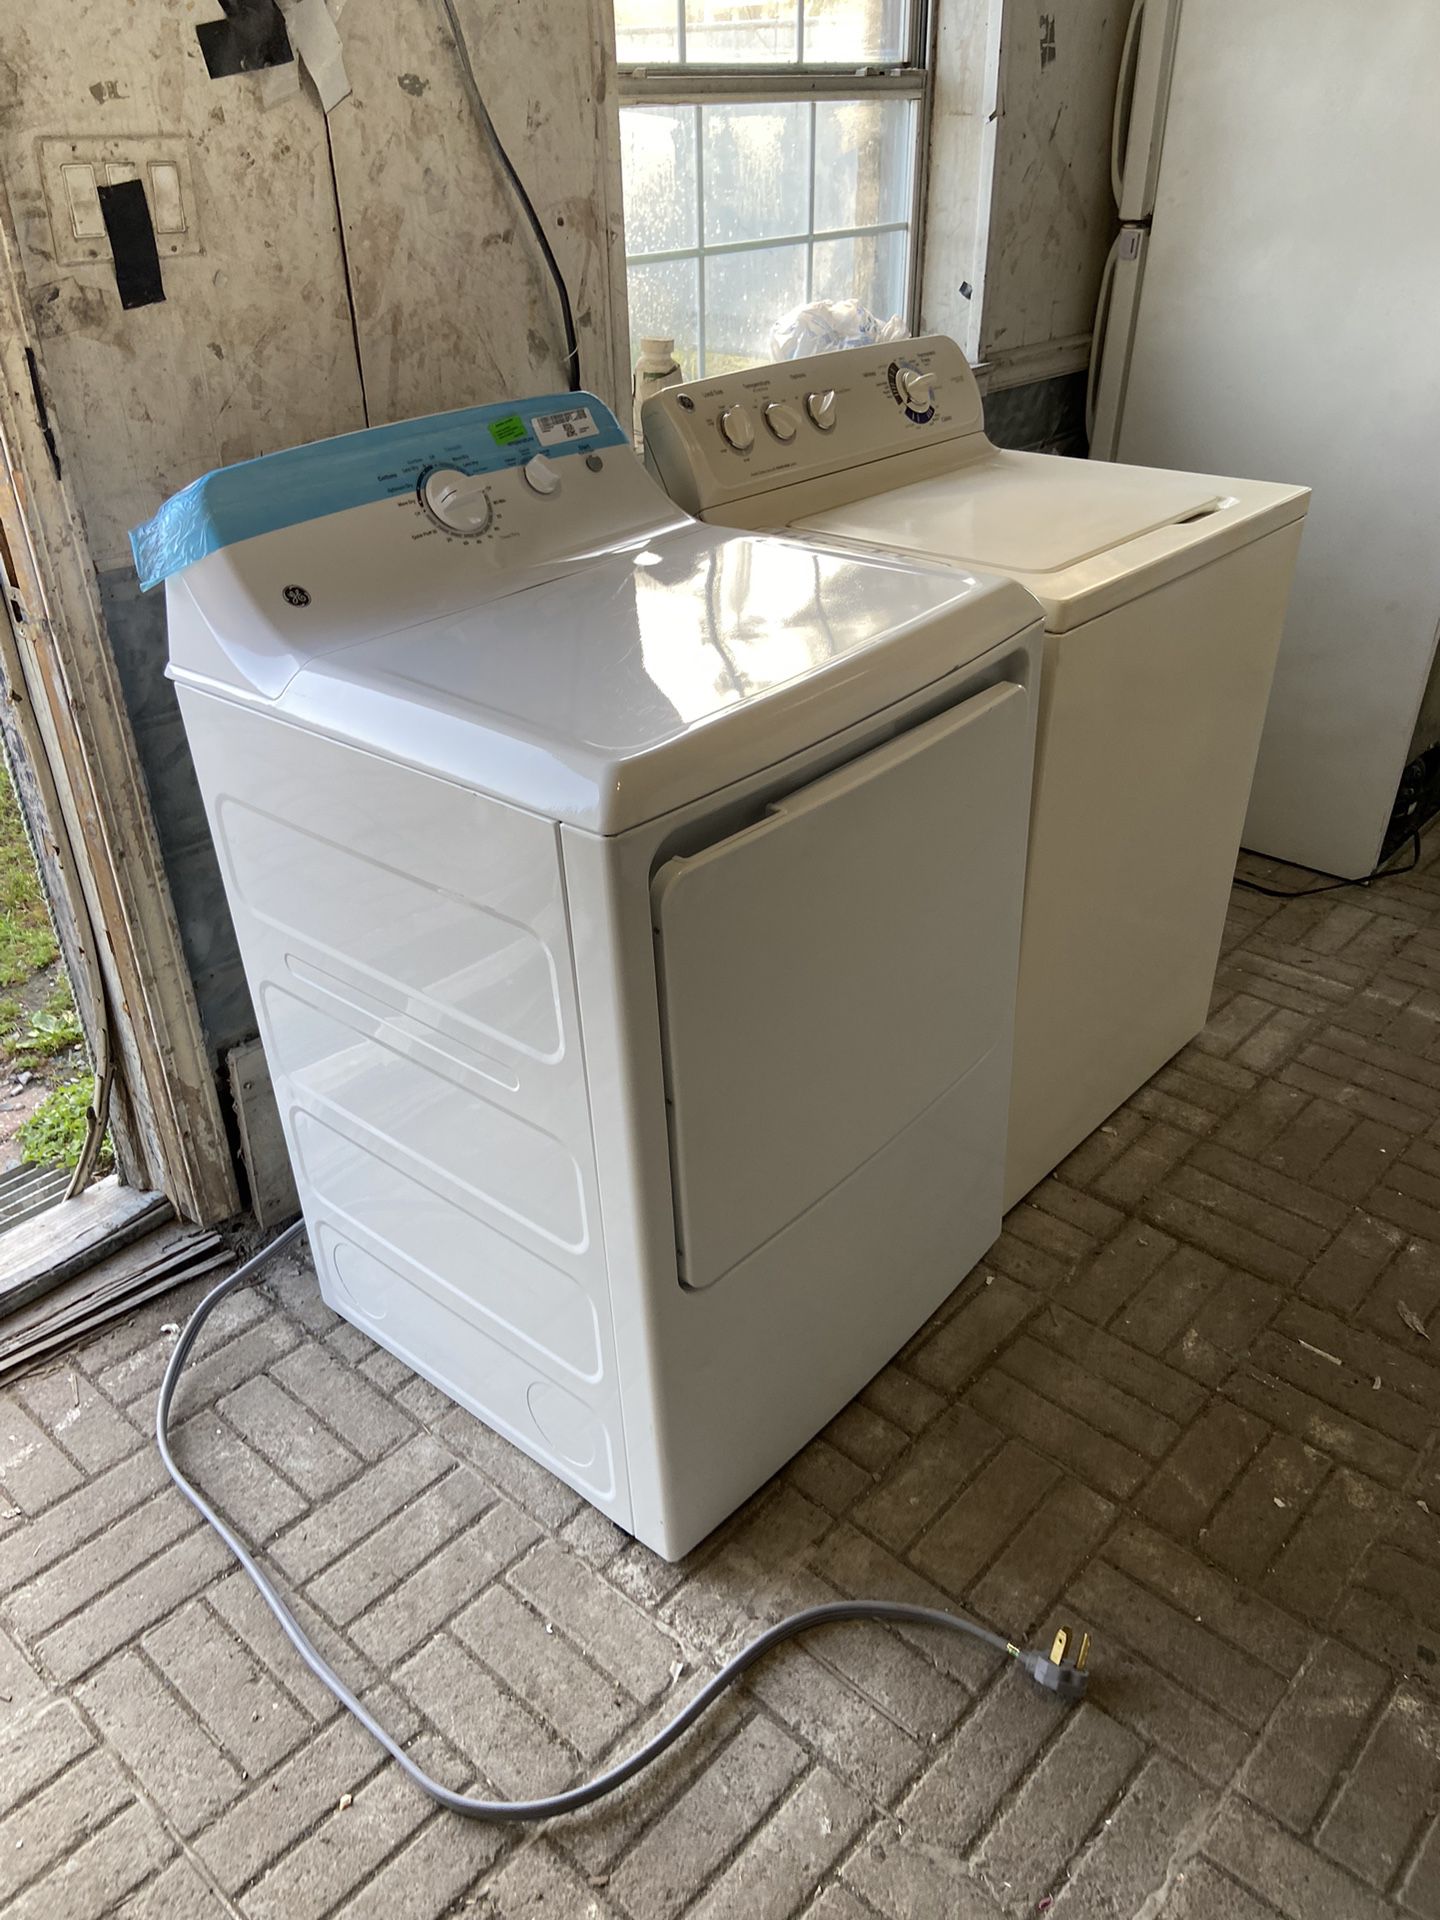 I WILL RUN BOTH FOR YOU. BOTH OF THEM ARE  G.E. SUPER CAPACITY WASHER & ELECTRIC DRYER SET.BOTH  RUN LIKE NEW! THERE ARE NO ISSUES WITH EITHER. TEXT 5